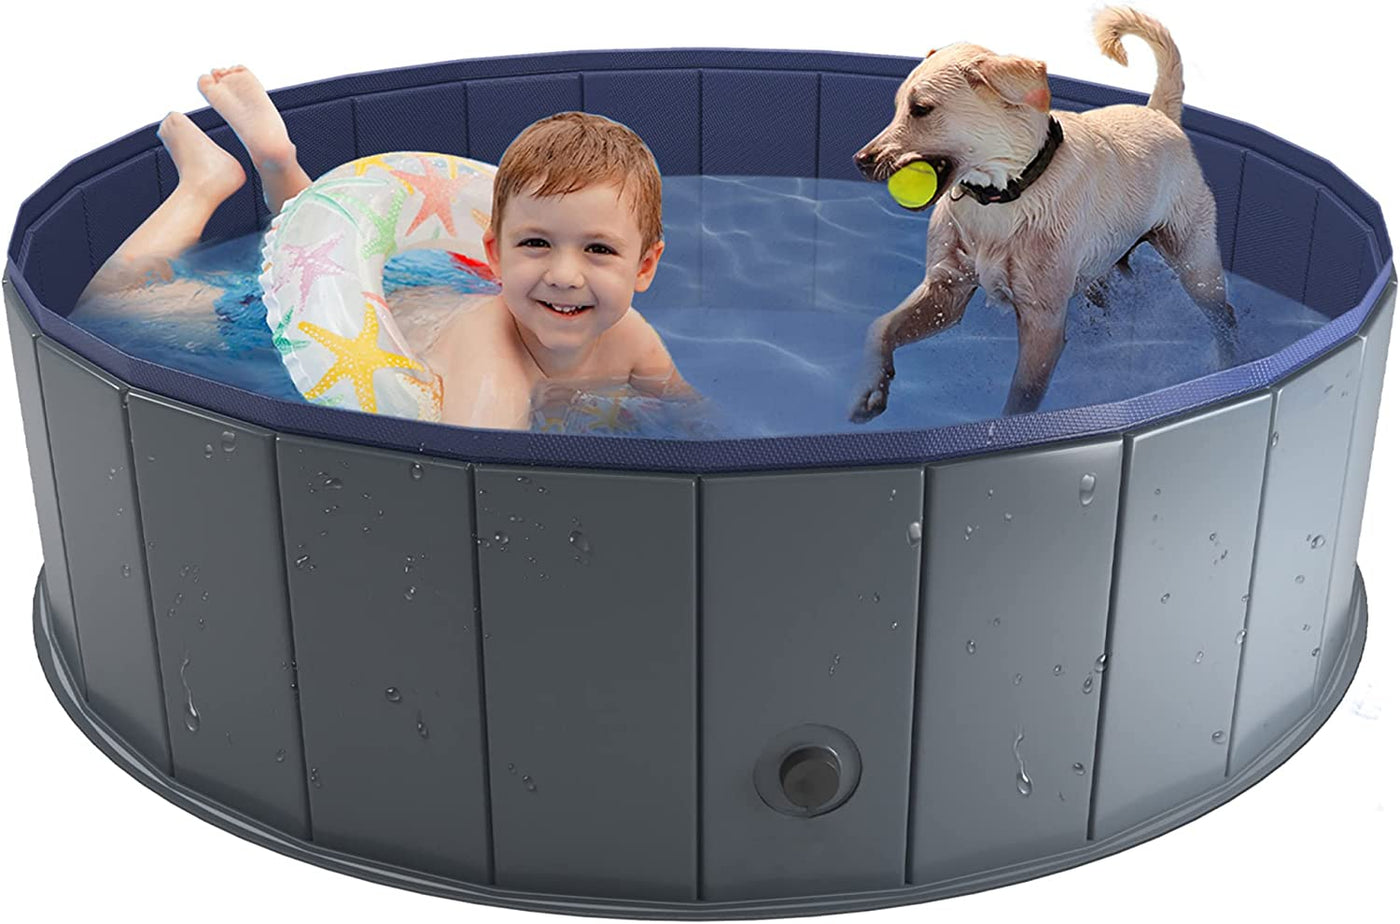  Foldable Dog Pool, Collapsible Hard Plastic Dog Swimming Pool, Portable Bath Tub for Pets Dogs and Cats, Pet Wading Pool for Indoor and Outdoor, 32 x 8 Inches